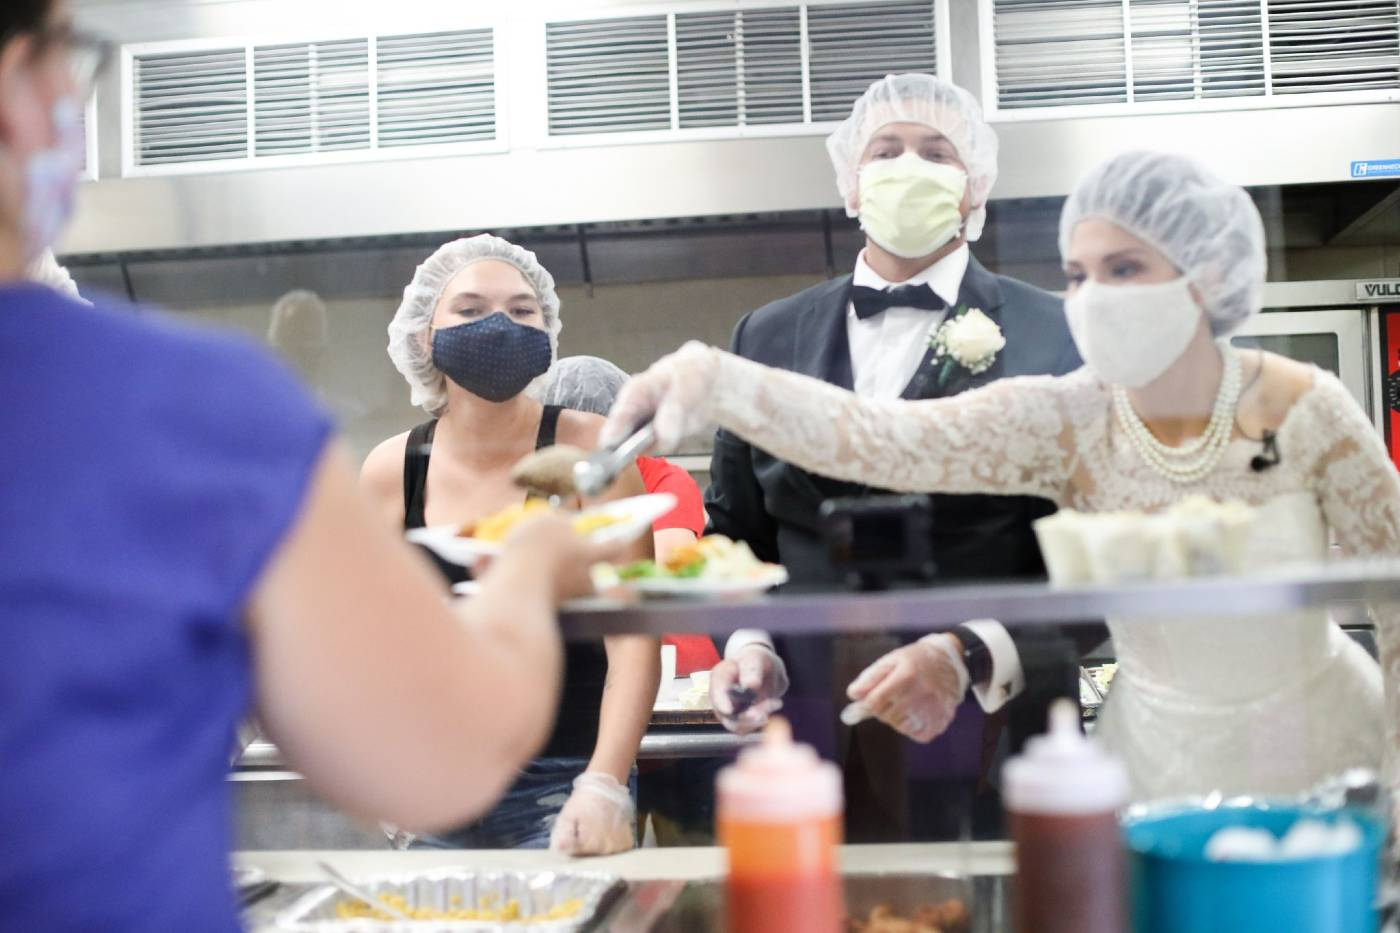 Bride and Groom Didn’t Just Donate Wedding Food To Homeless, They Dished it Up On Their Big Day